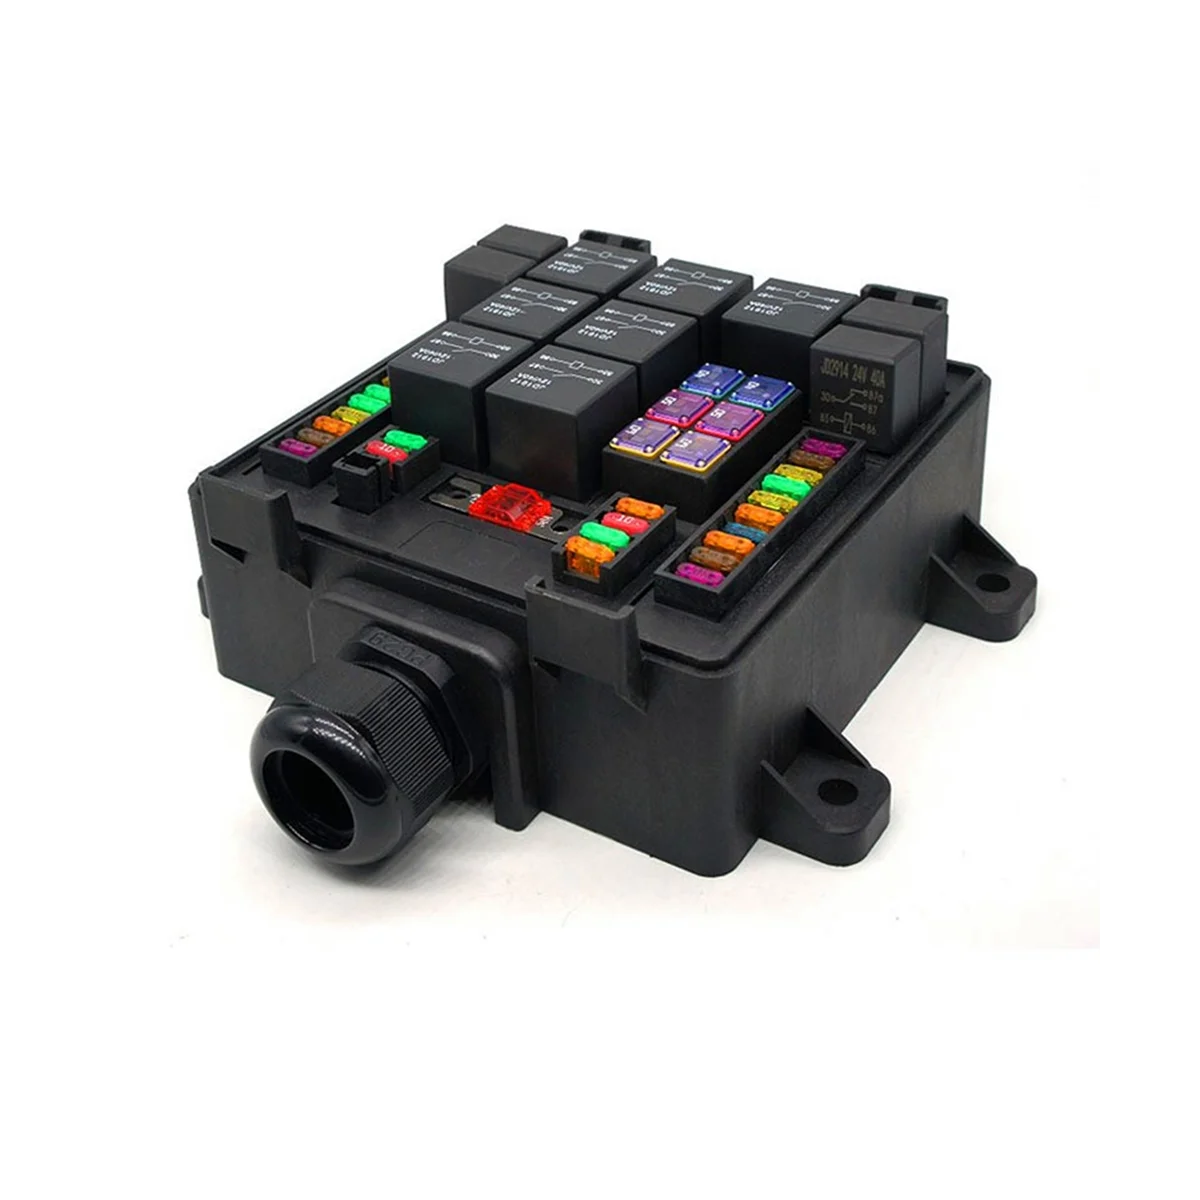 

12V 40A Car Waterproof Safety Box Relay Safety Box Control Relay Modification Vehicle Control the Safety Box 24V 5P